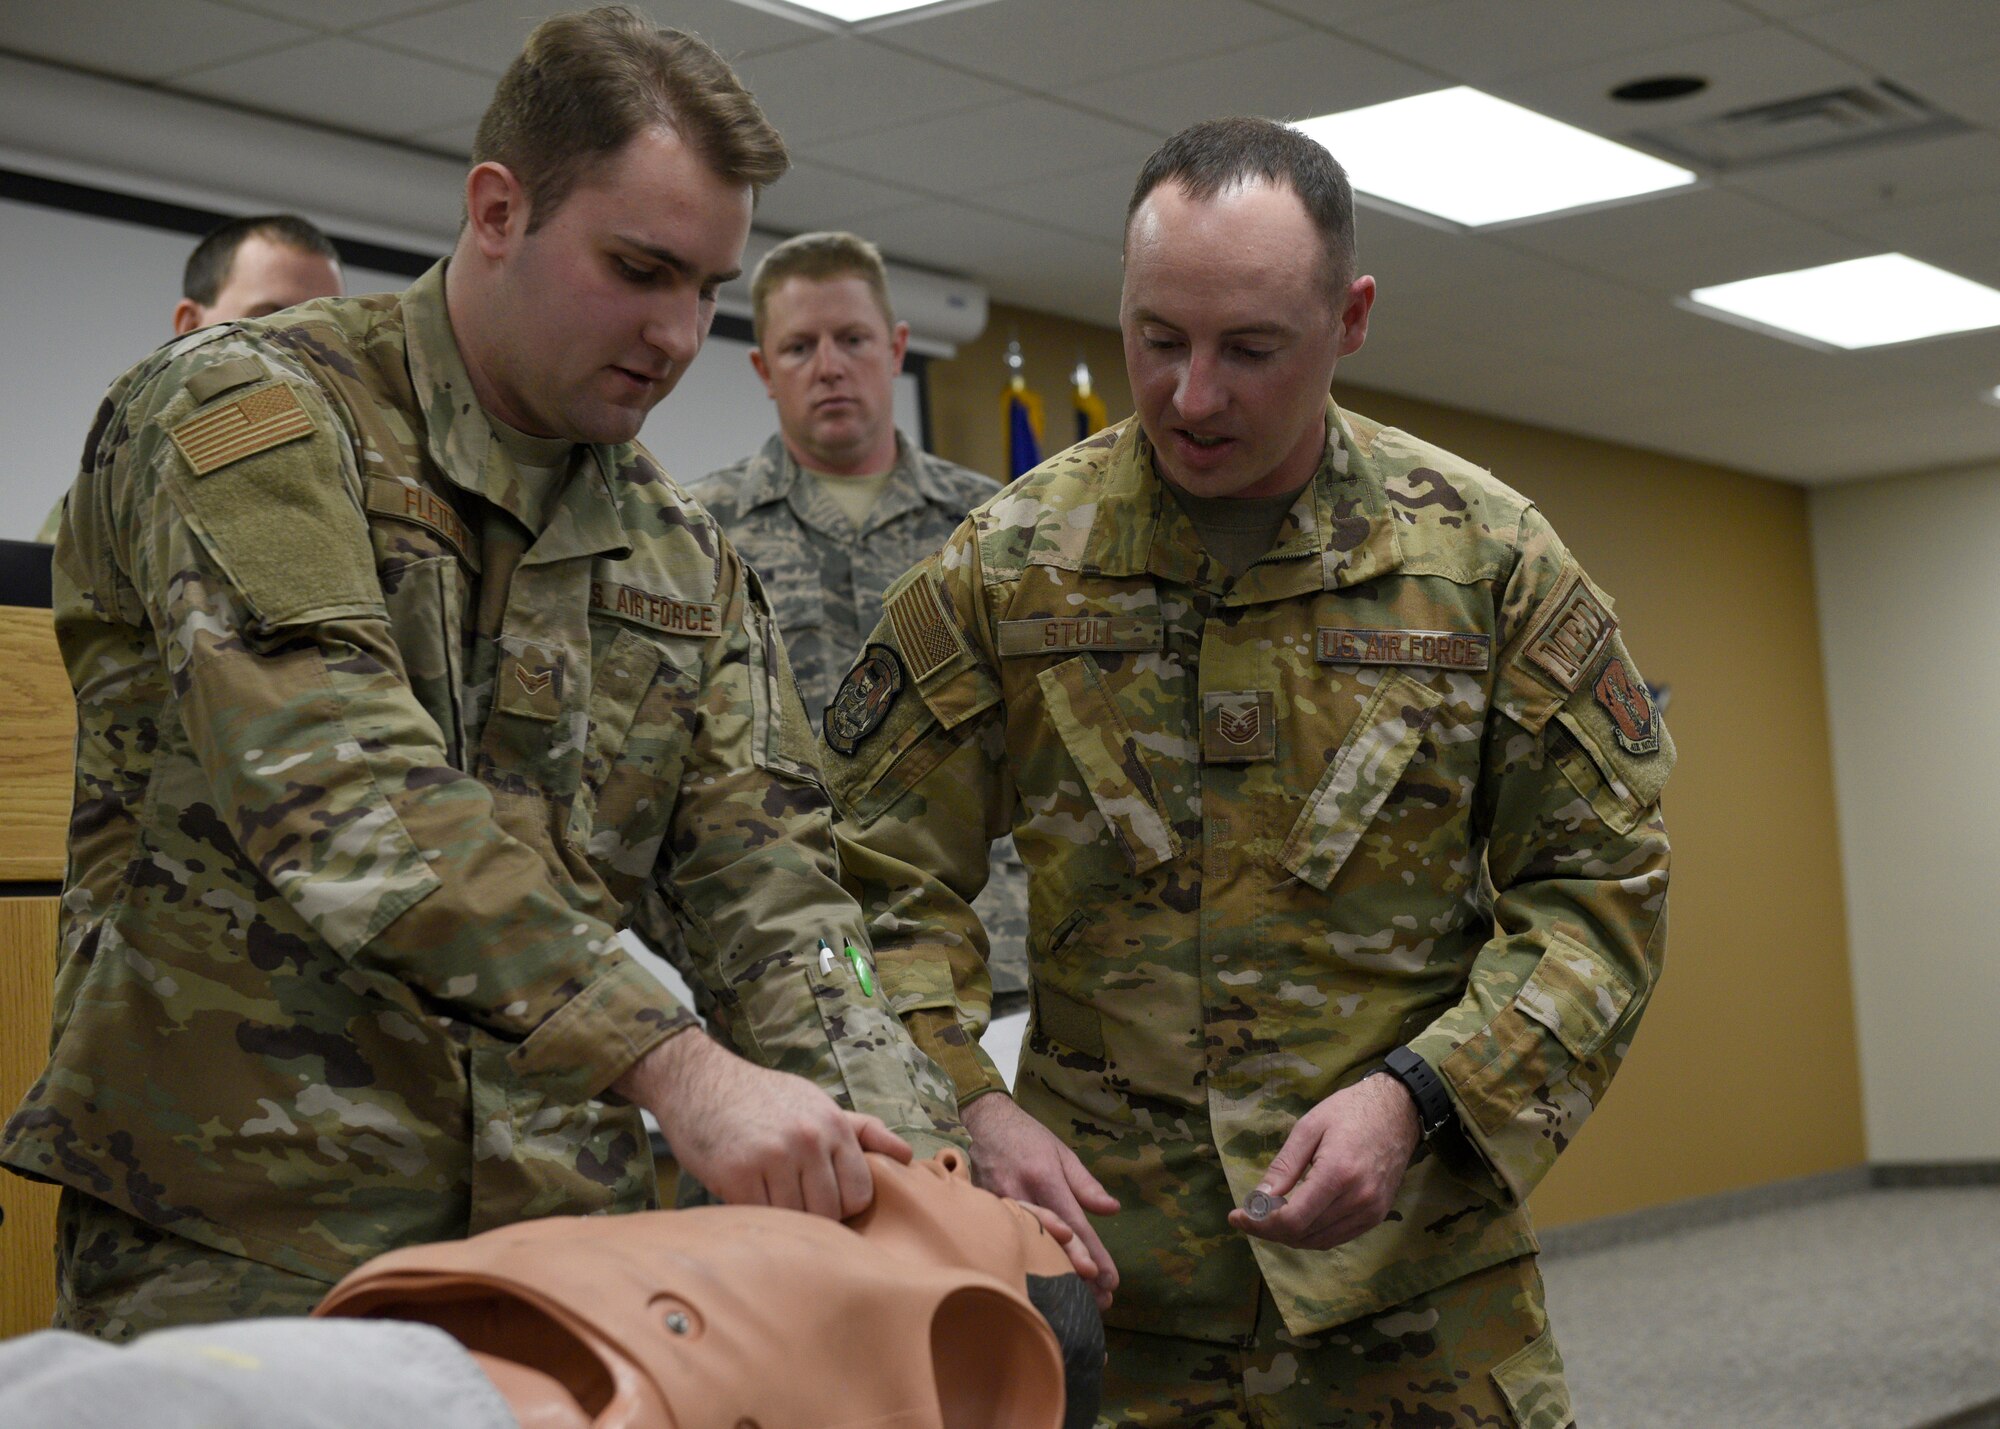 U.S. Air Force Airman 1st Class Erik Fletcher, a material management journeyman from the 120th Logistics Readiness Squadron, practices keeping a simulated patient's air passage clear during self-aid buddy care training, Jan. 4, 2020, at Great Falls, Montana.